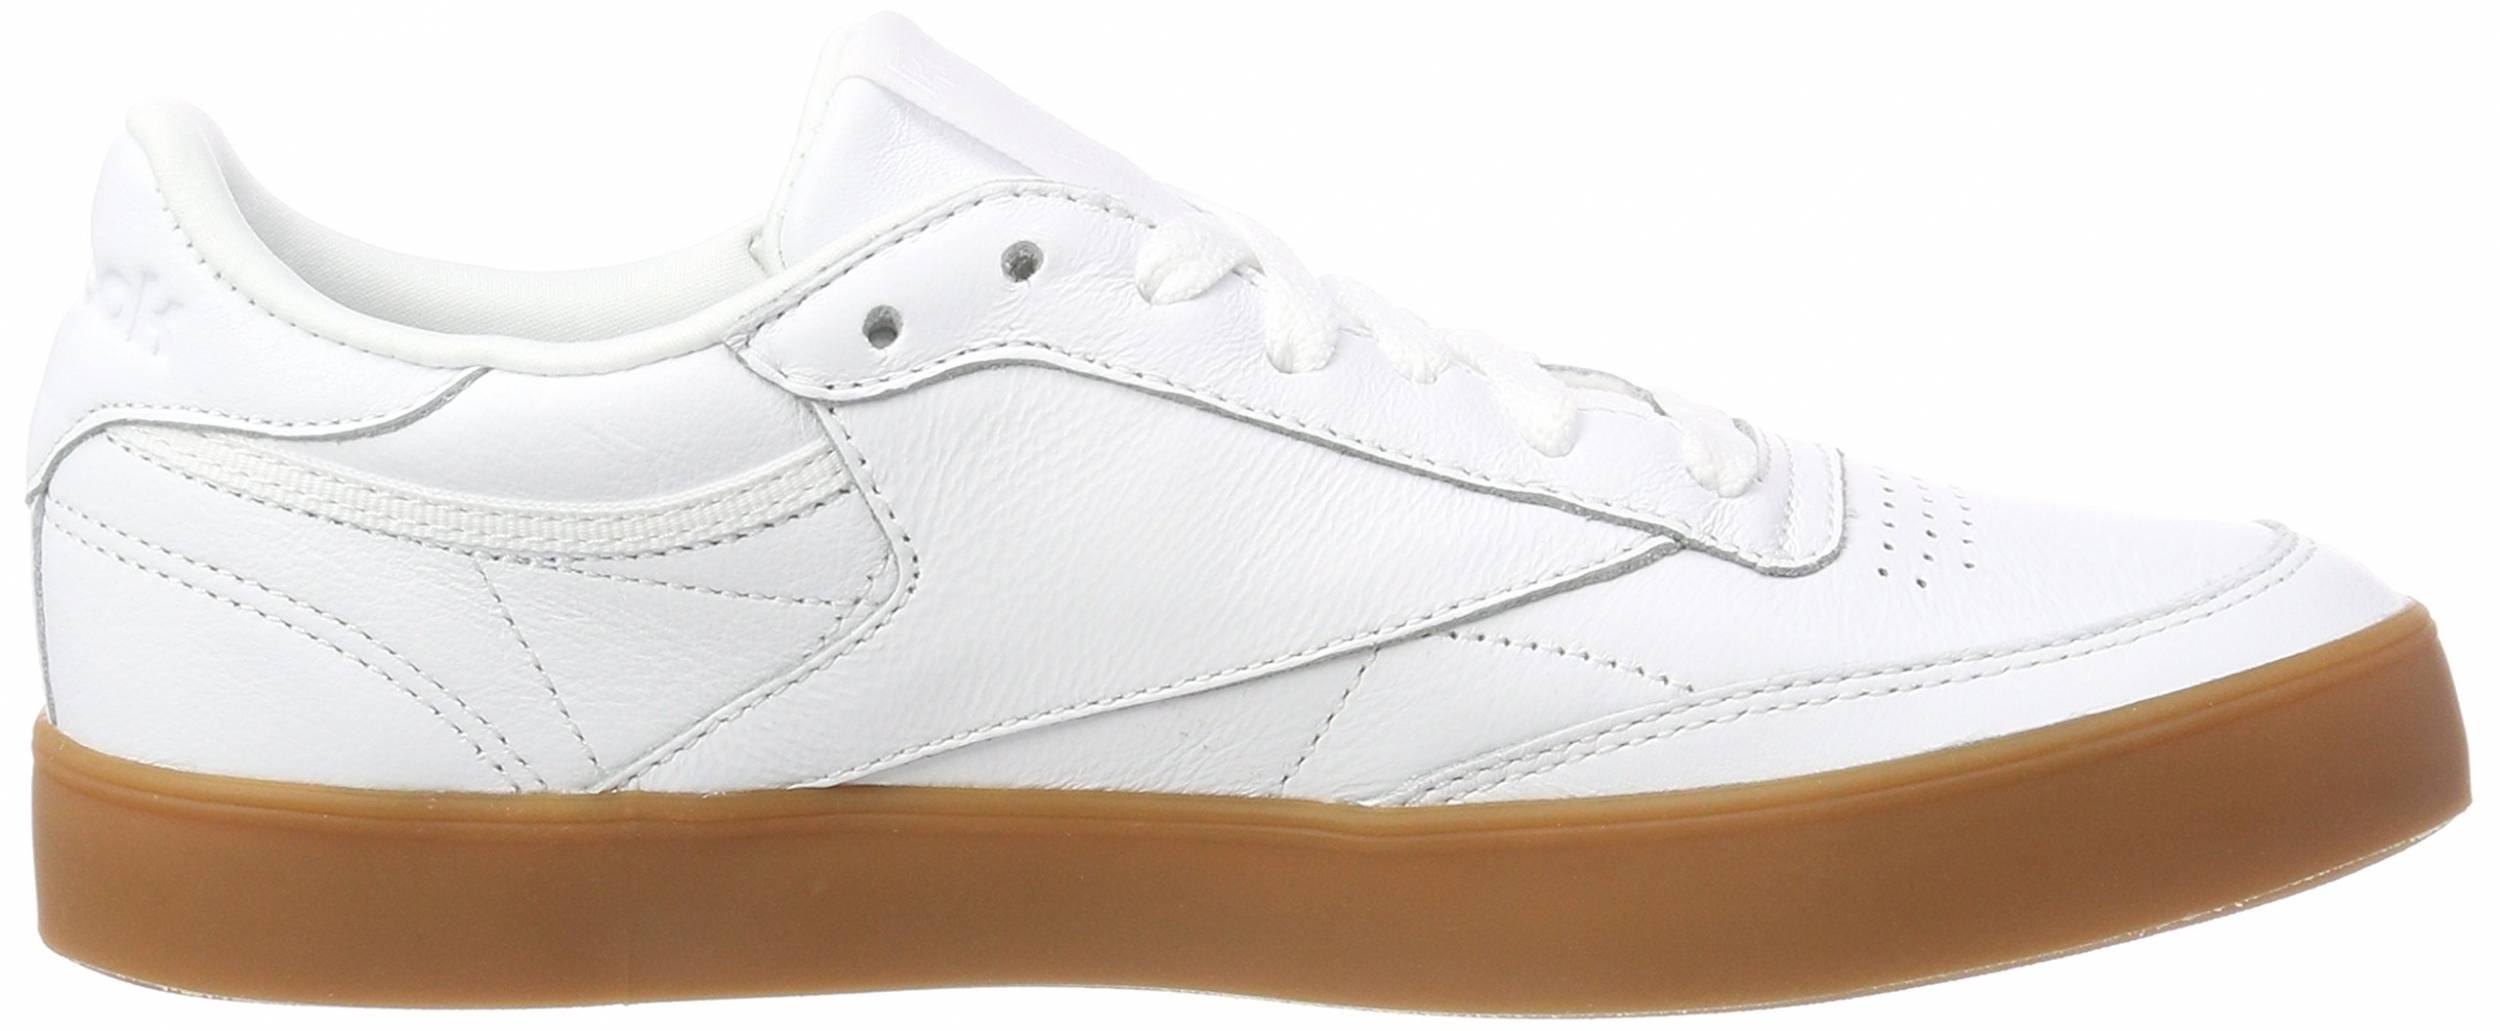 reebok classic club c 85 trainers in white leather with gum sole